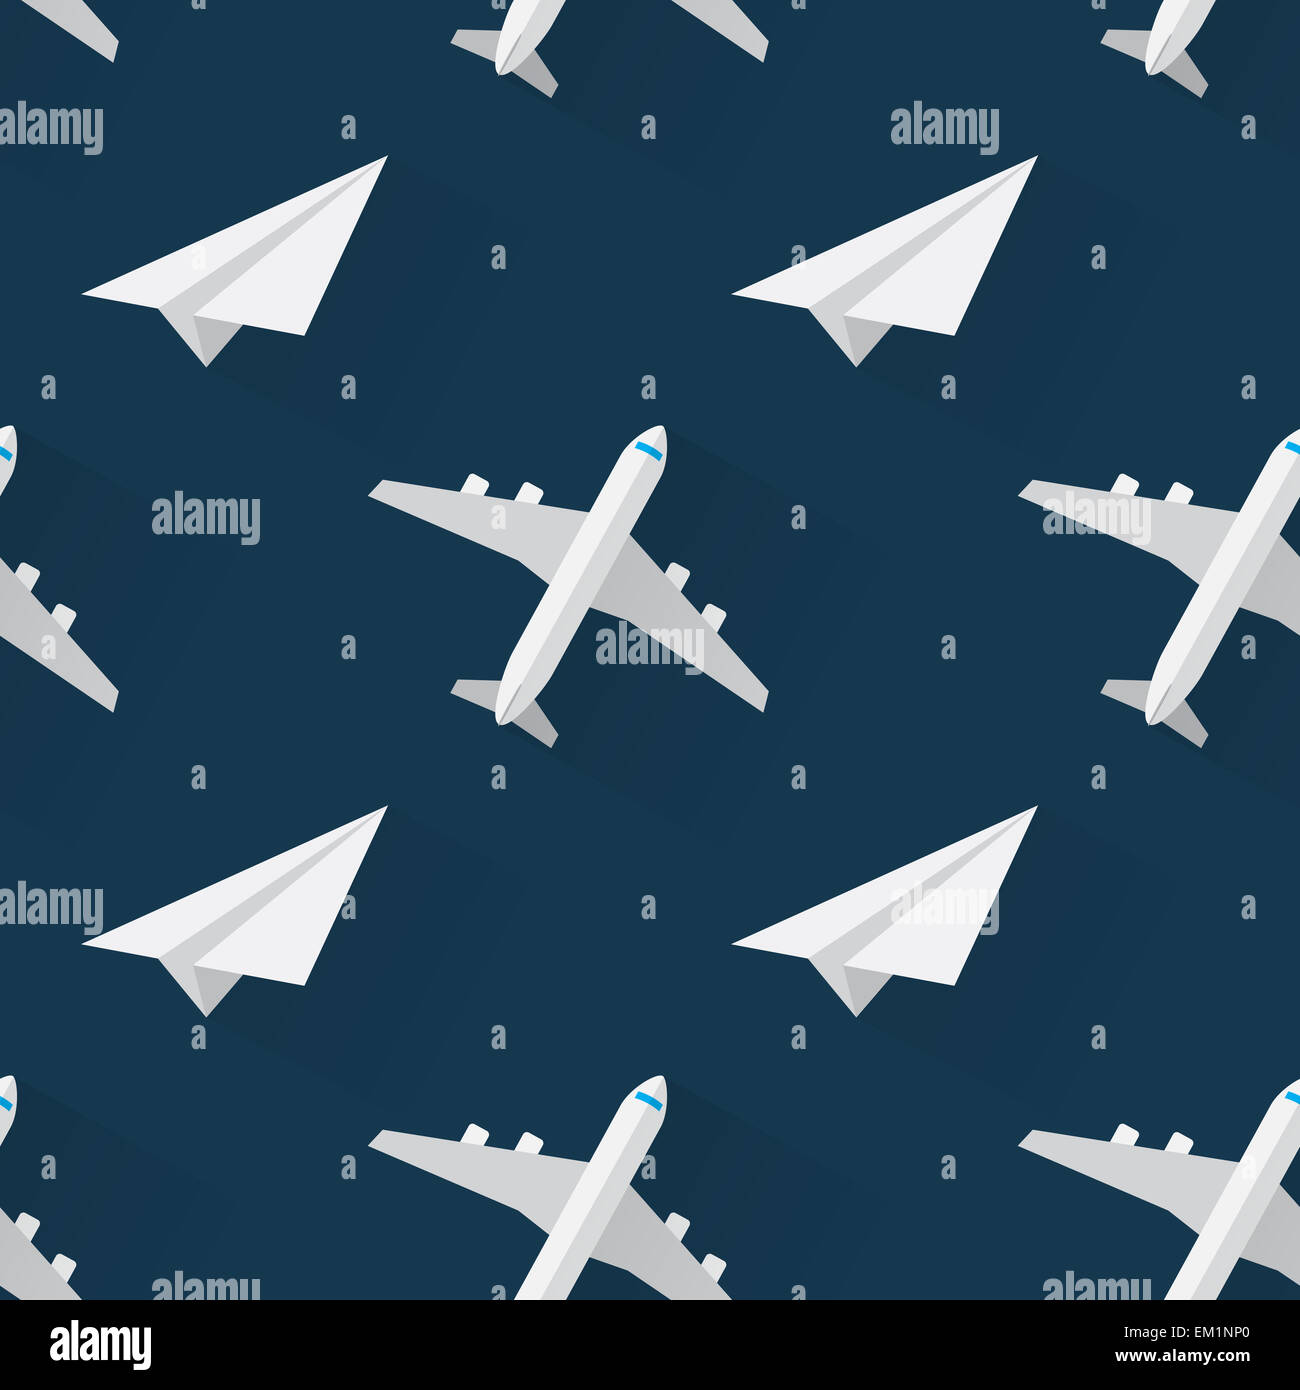 Seamless background with airplanes modern flat style Stock Photo